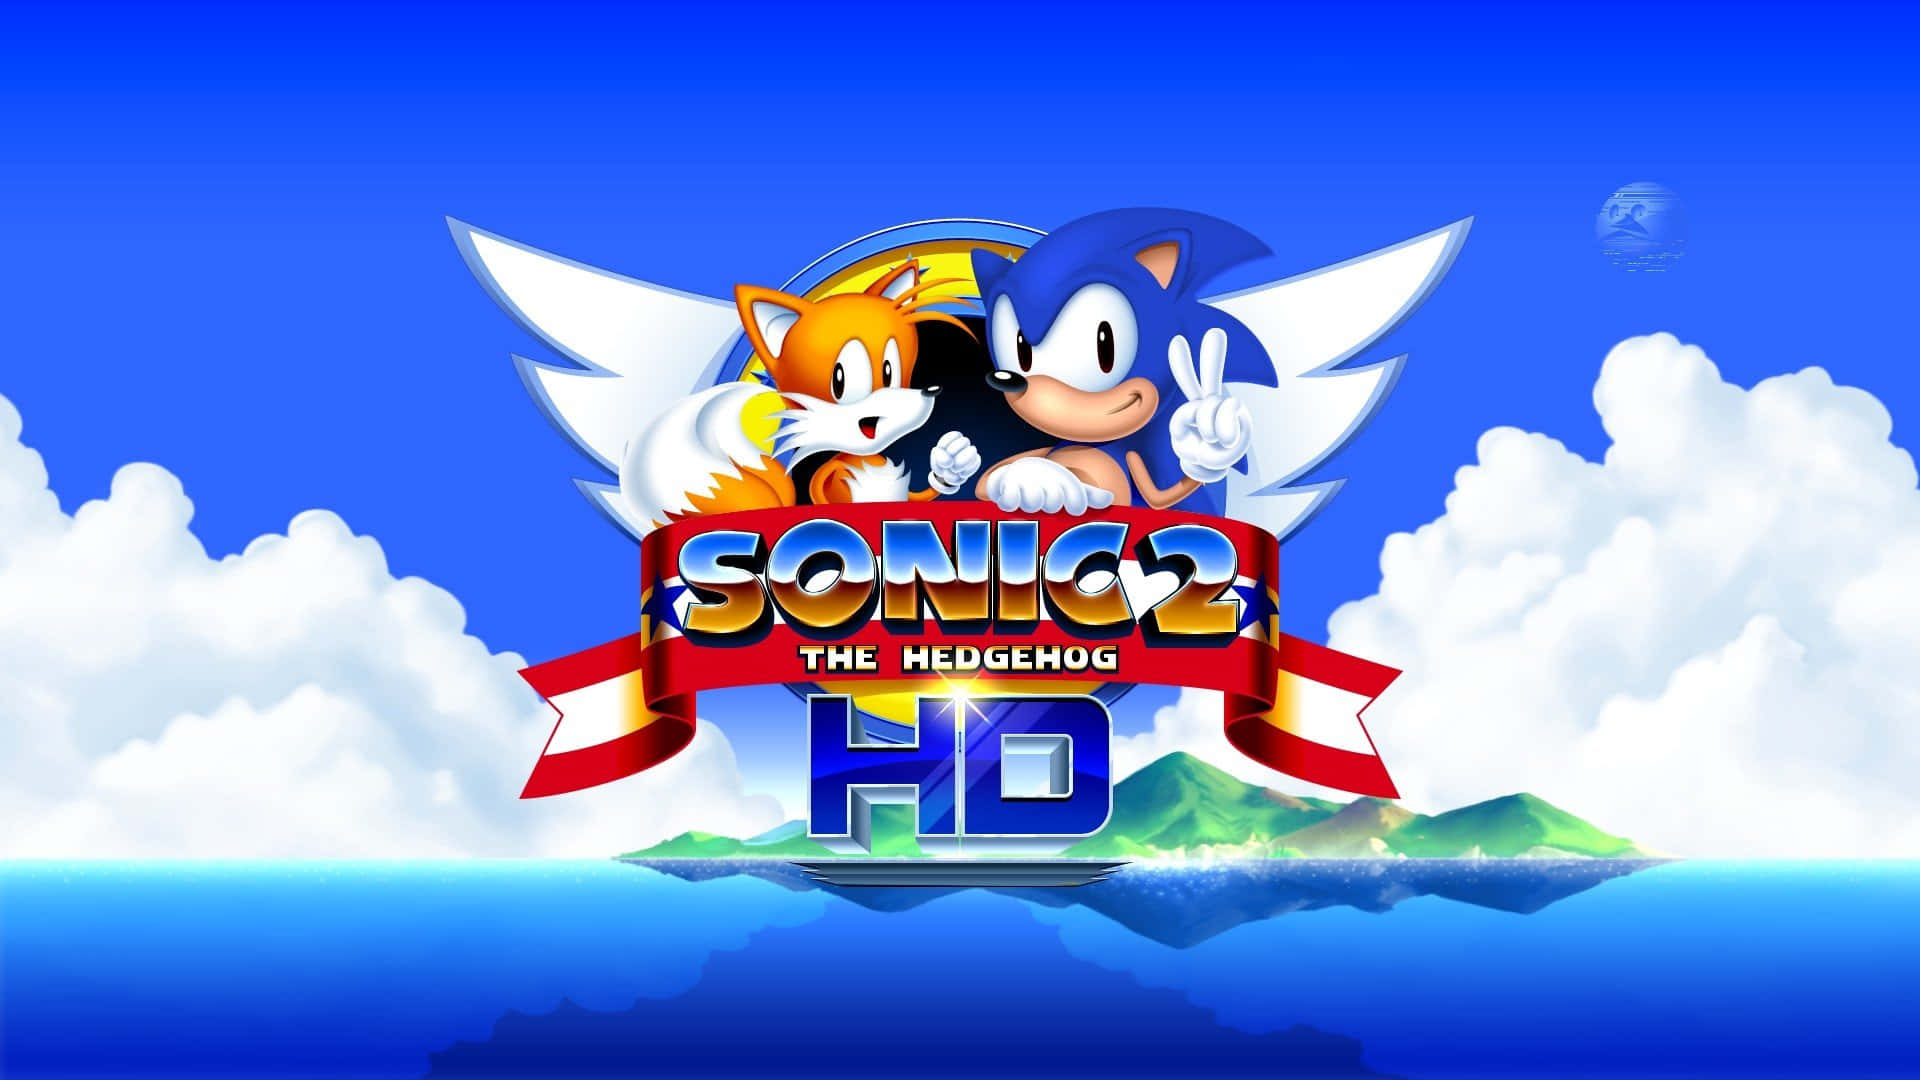 Sonic the Hedgehog speedily rushing in his iconic pose against a dynamic blue background Wallpaper